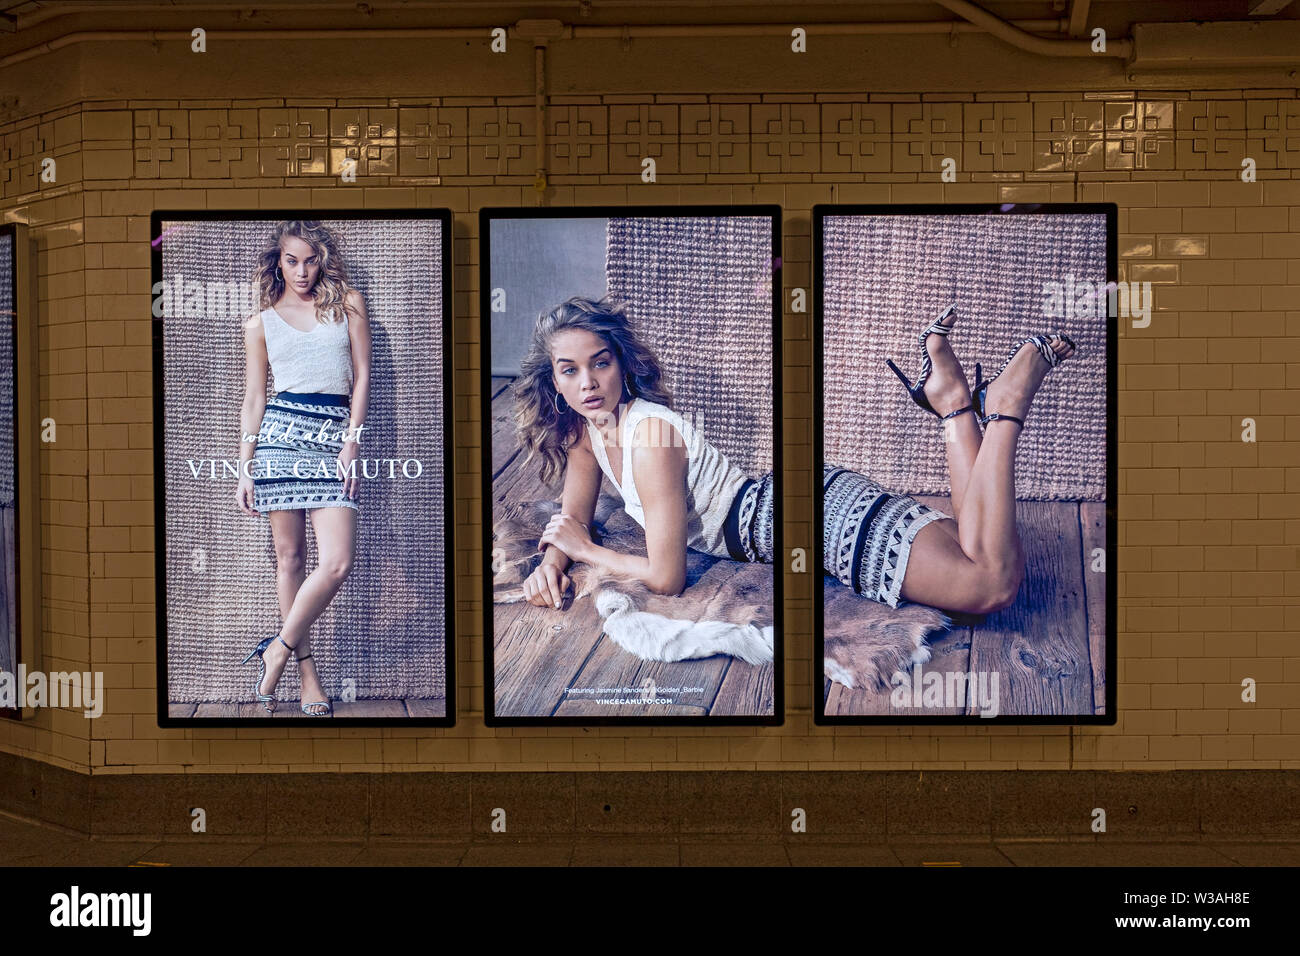 Triptych A Co Ordinated 3 Panel Screen With Moving Images Advertising For Vince Camuto The Nine West Fashion Designer At A Subway Station In Nyc Stock Photo Alamy,Geometric Abstract Graphic Design Background